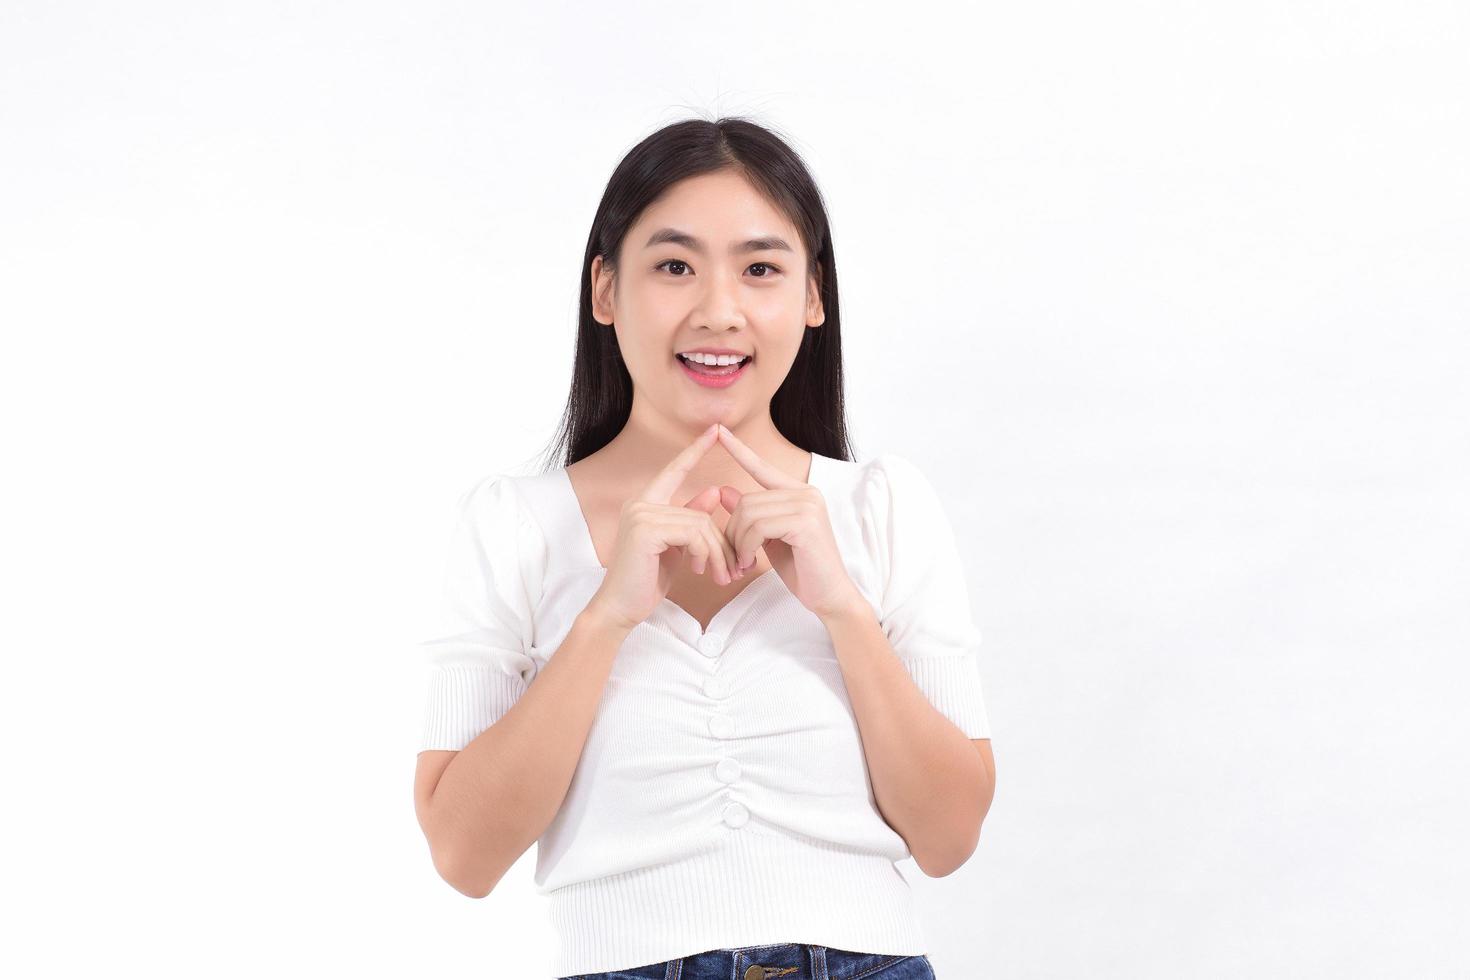 Asian beauty woman standing smiling in pink dress is looking at something while touching her face on a white background. photo